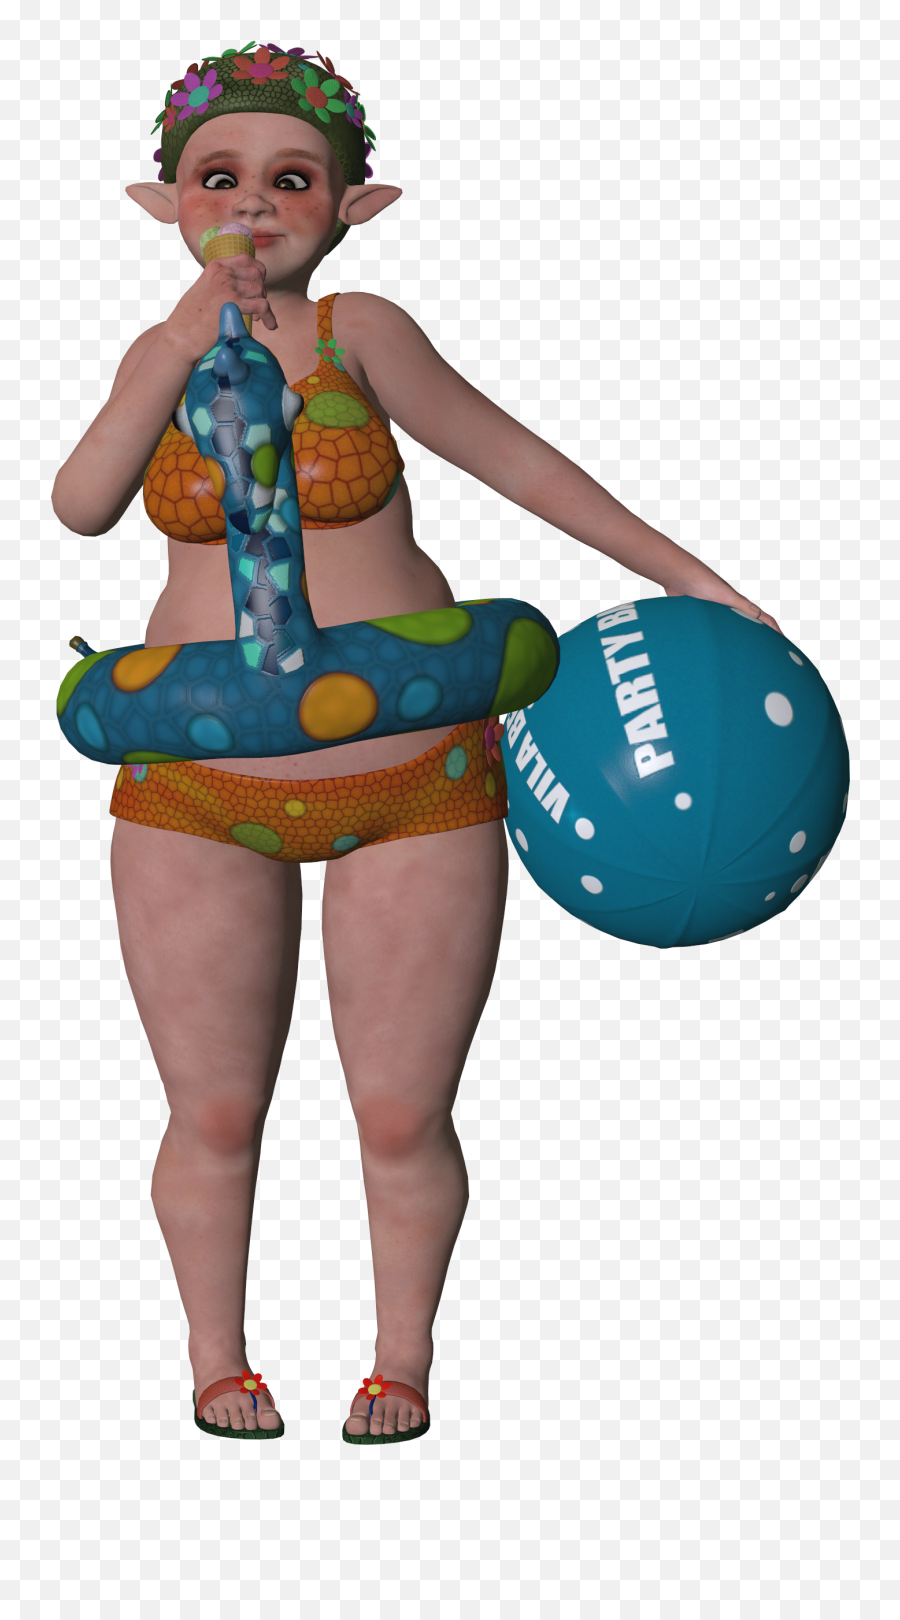 Swimsuit Is With An Inflatable Ball - Woman With Beach Ball Emoji,Swimsuit Clipart